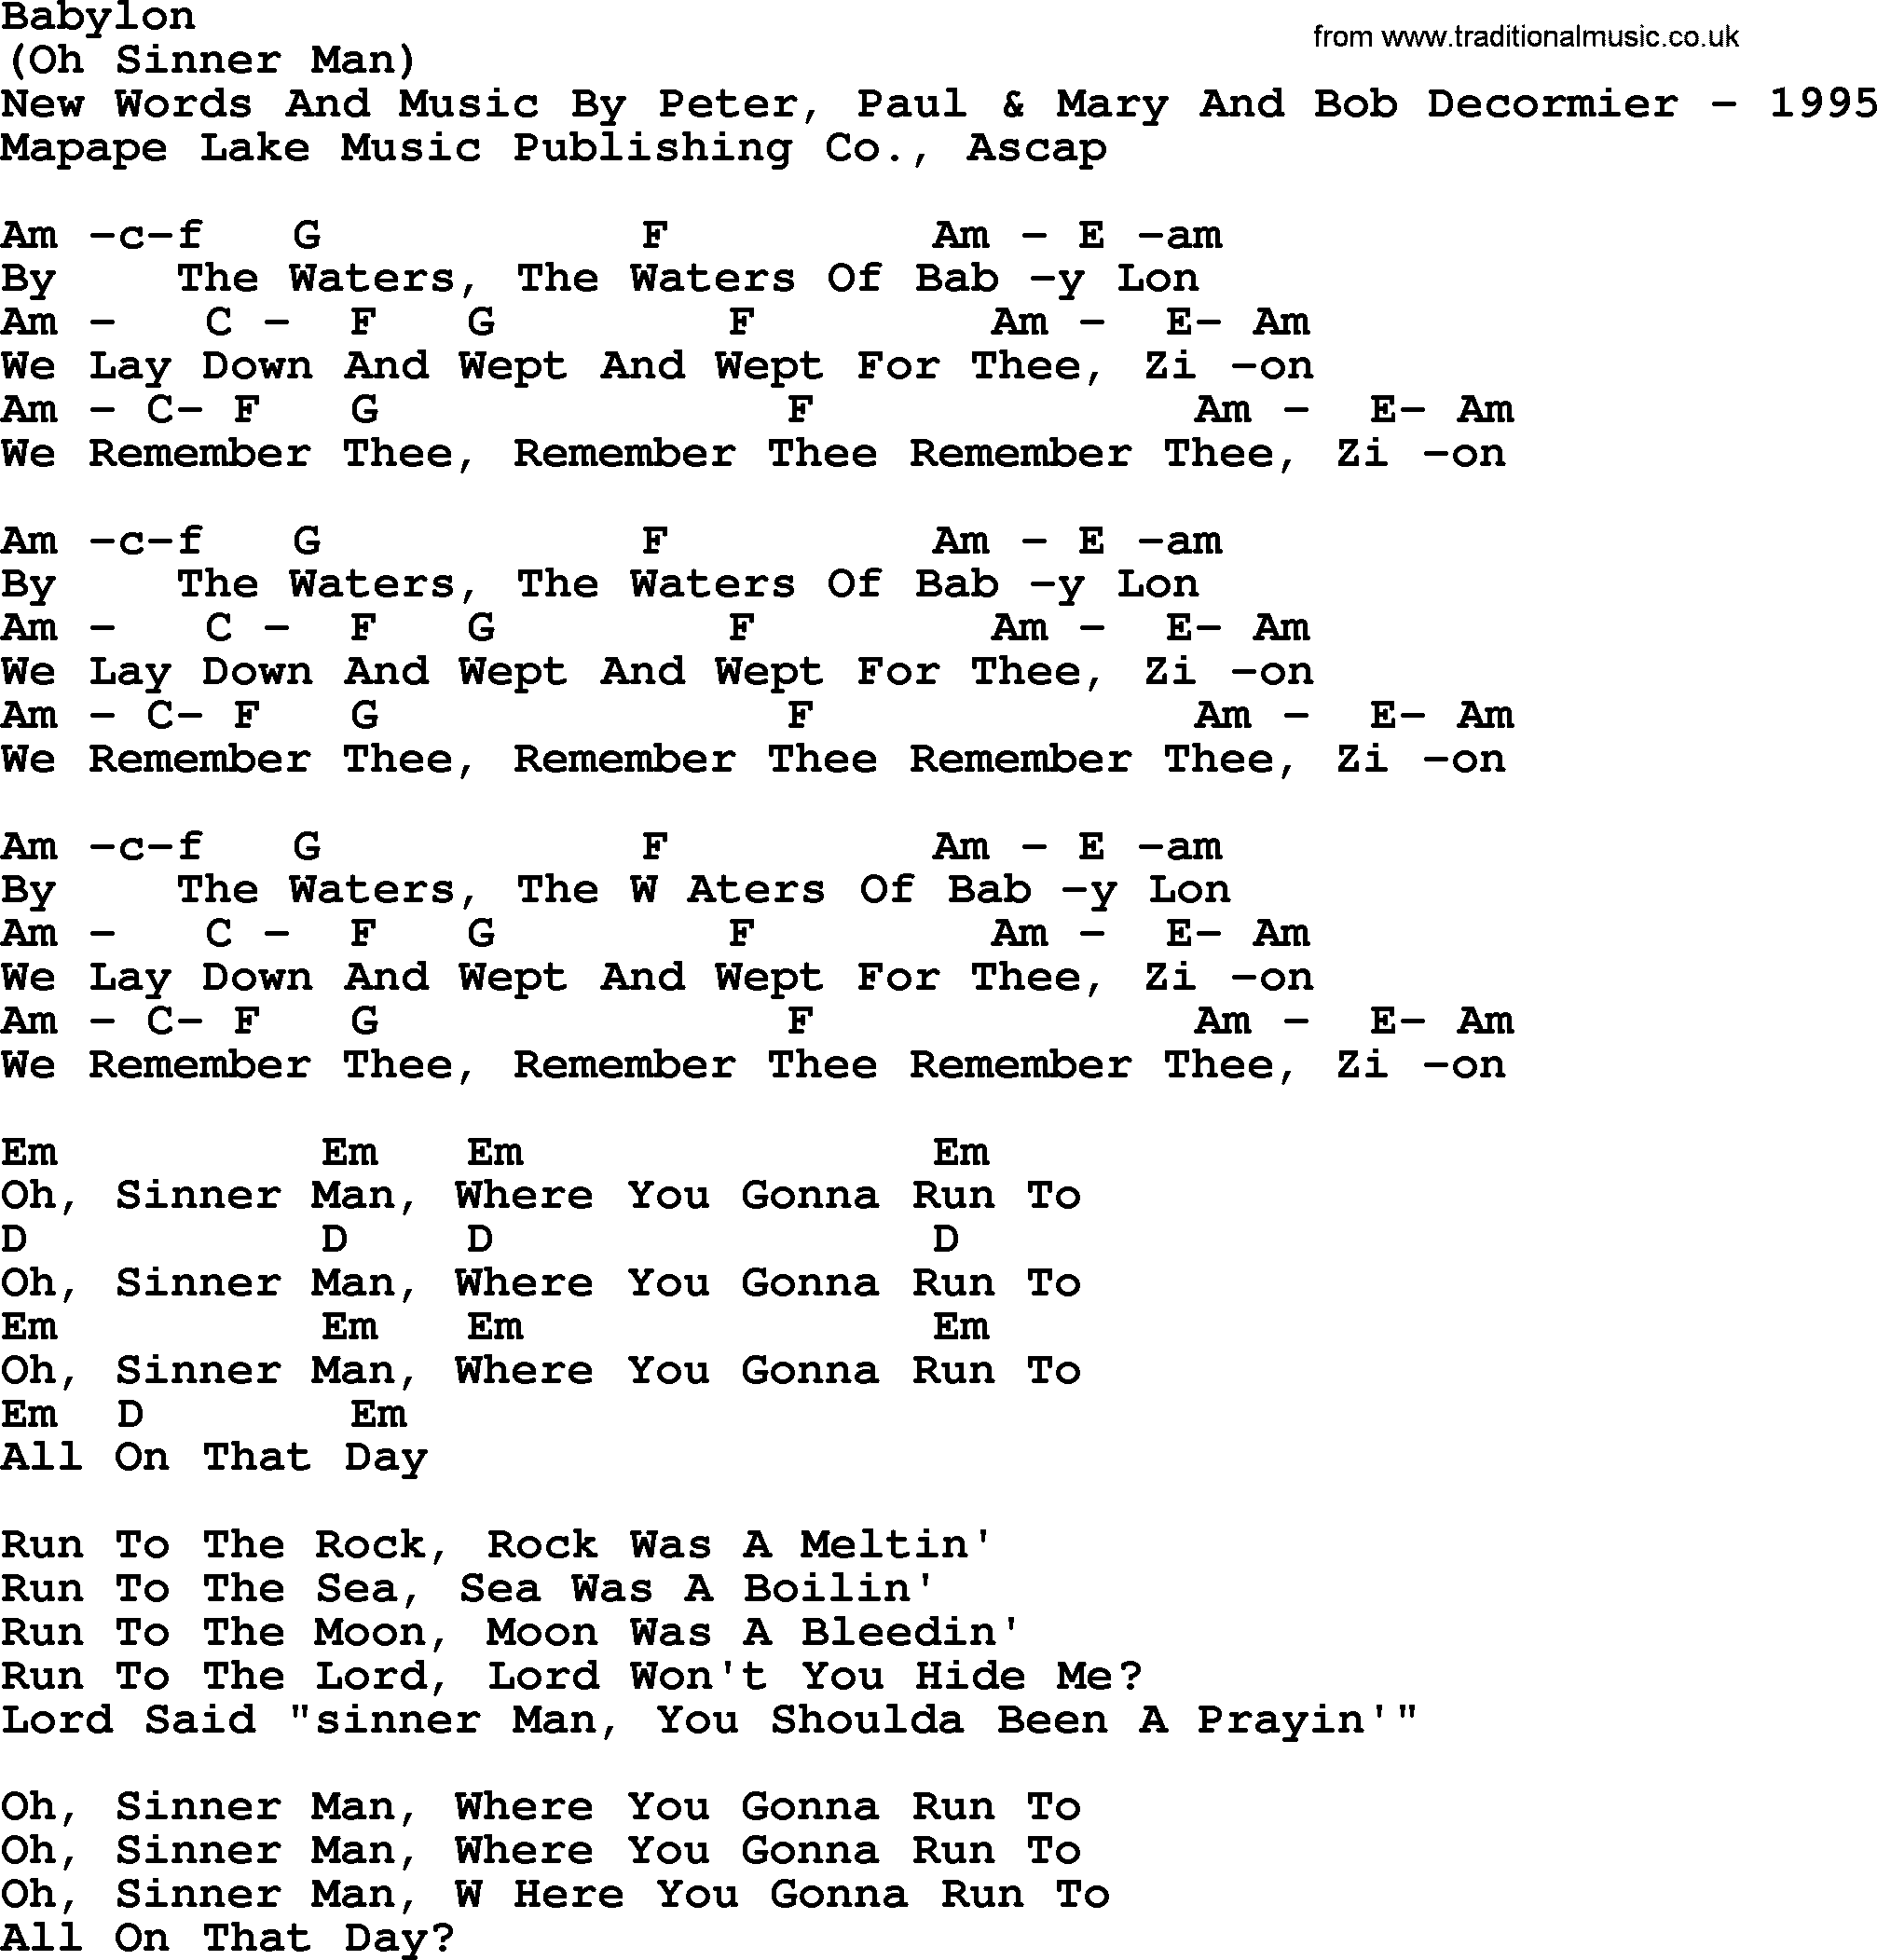 Peter, Paul and Mary song Babylon, lyrics and chords